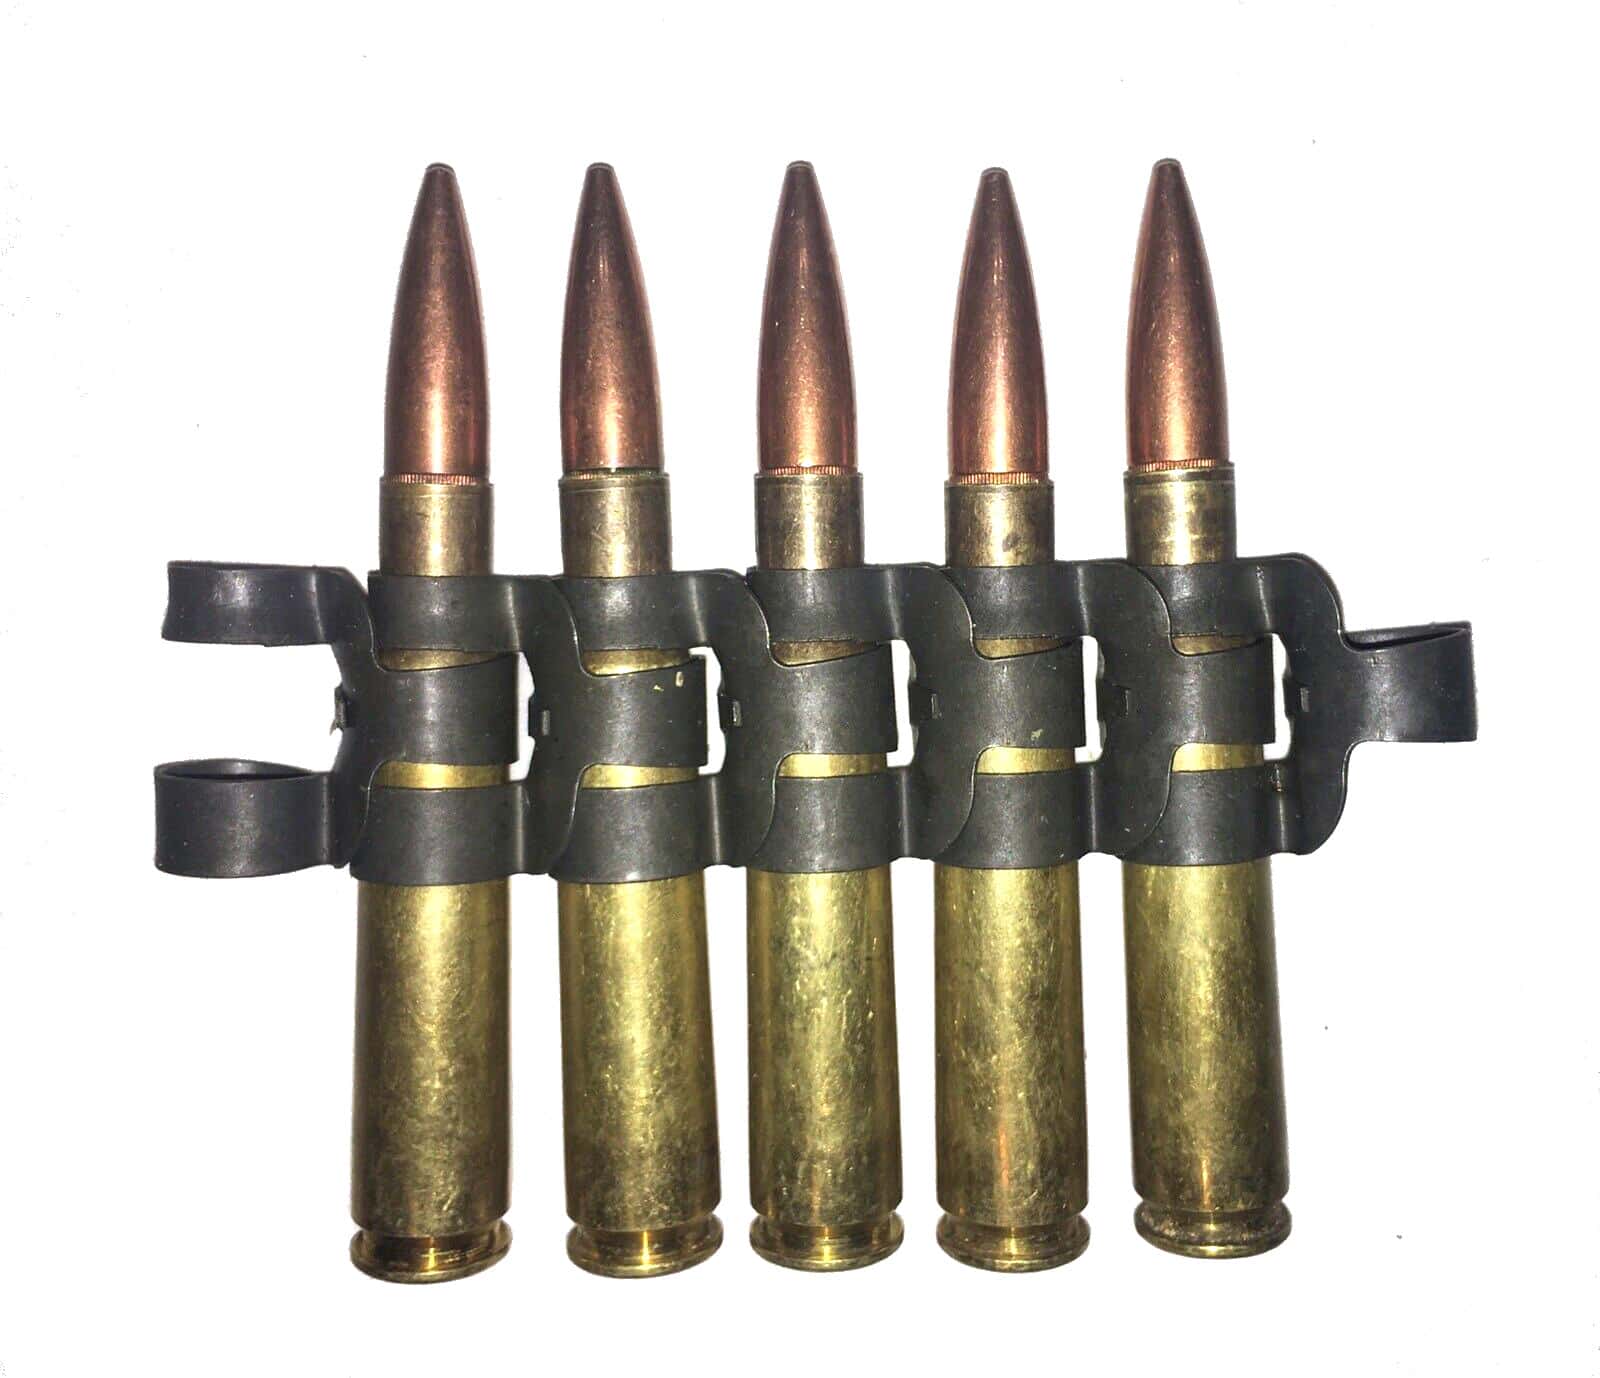 50 BMG - M2 Browning - Snap Caps Dummy Rounds - Fake Bullet